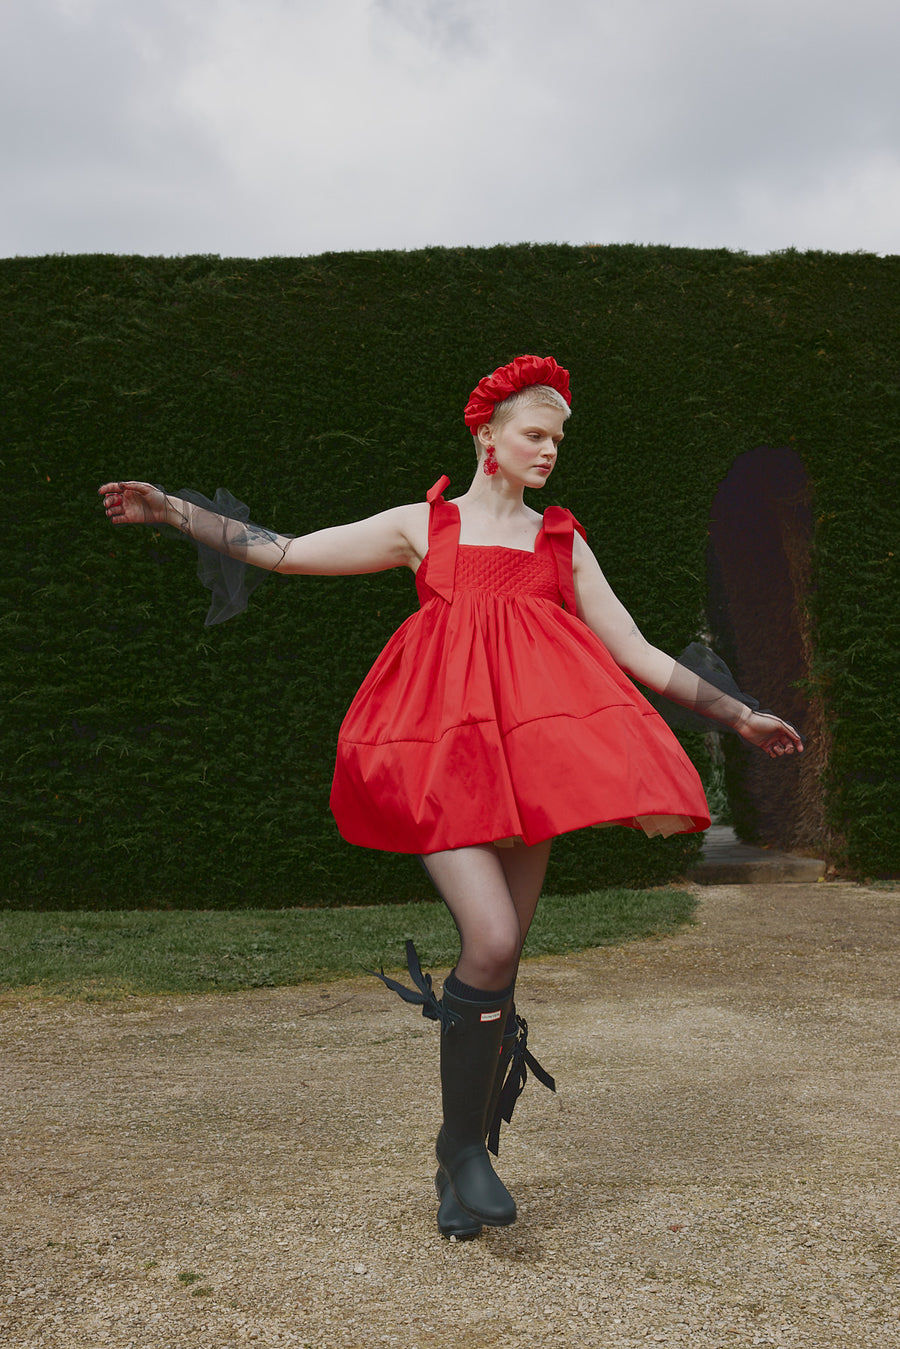 The Dolly Mini Dress in Red Taffeta with bow straps by House of Campbell.